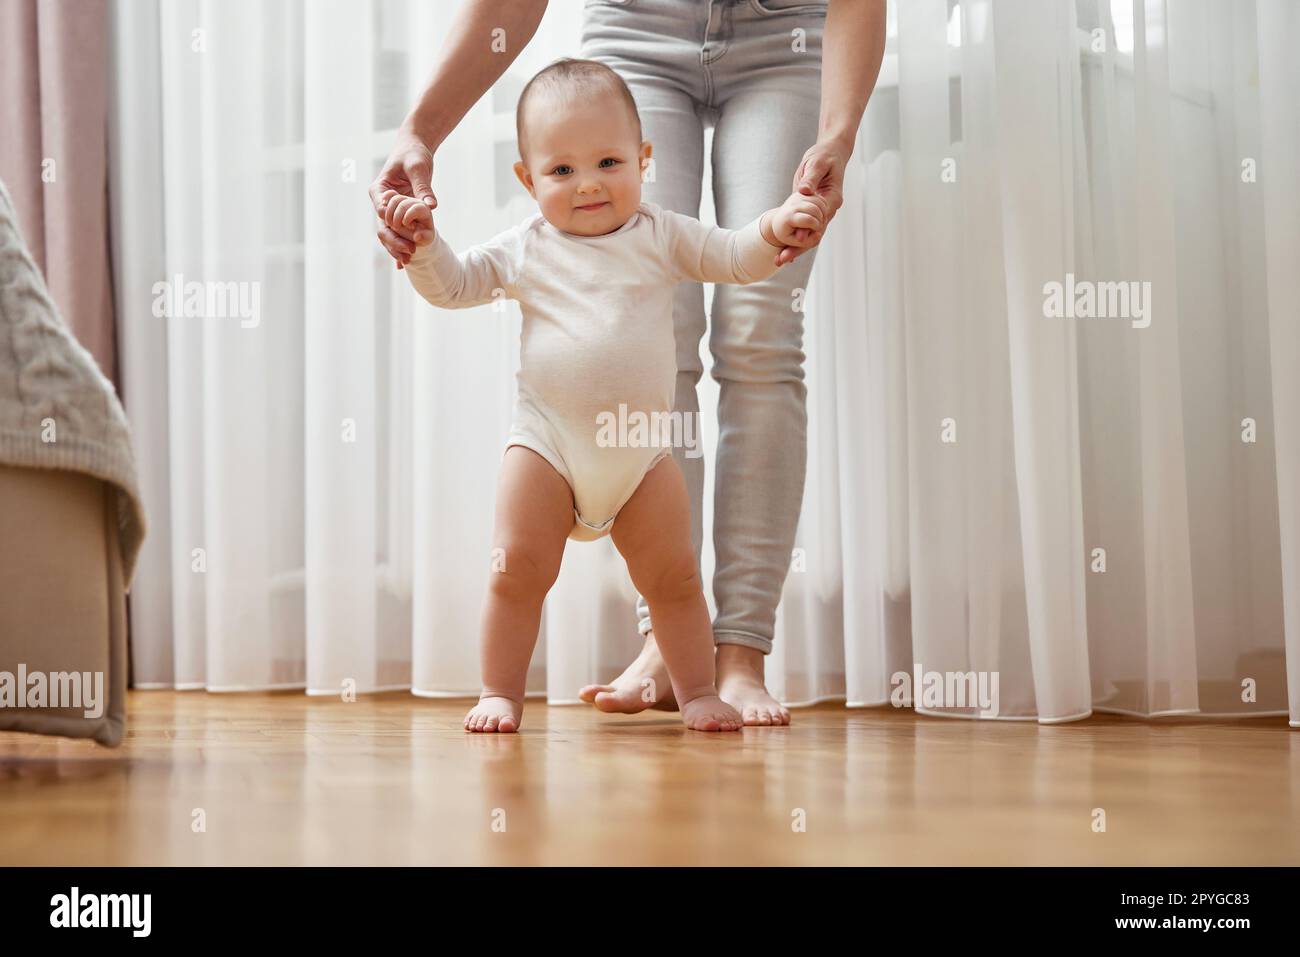 happy little baby girl learning to walk with mother help Stock Photo